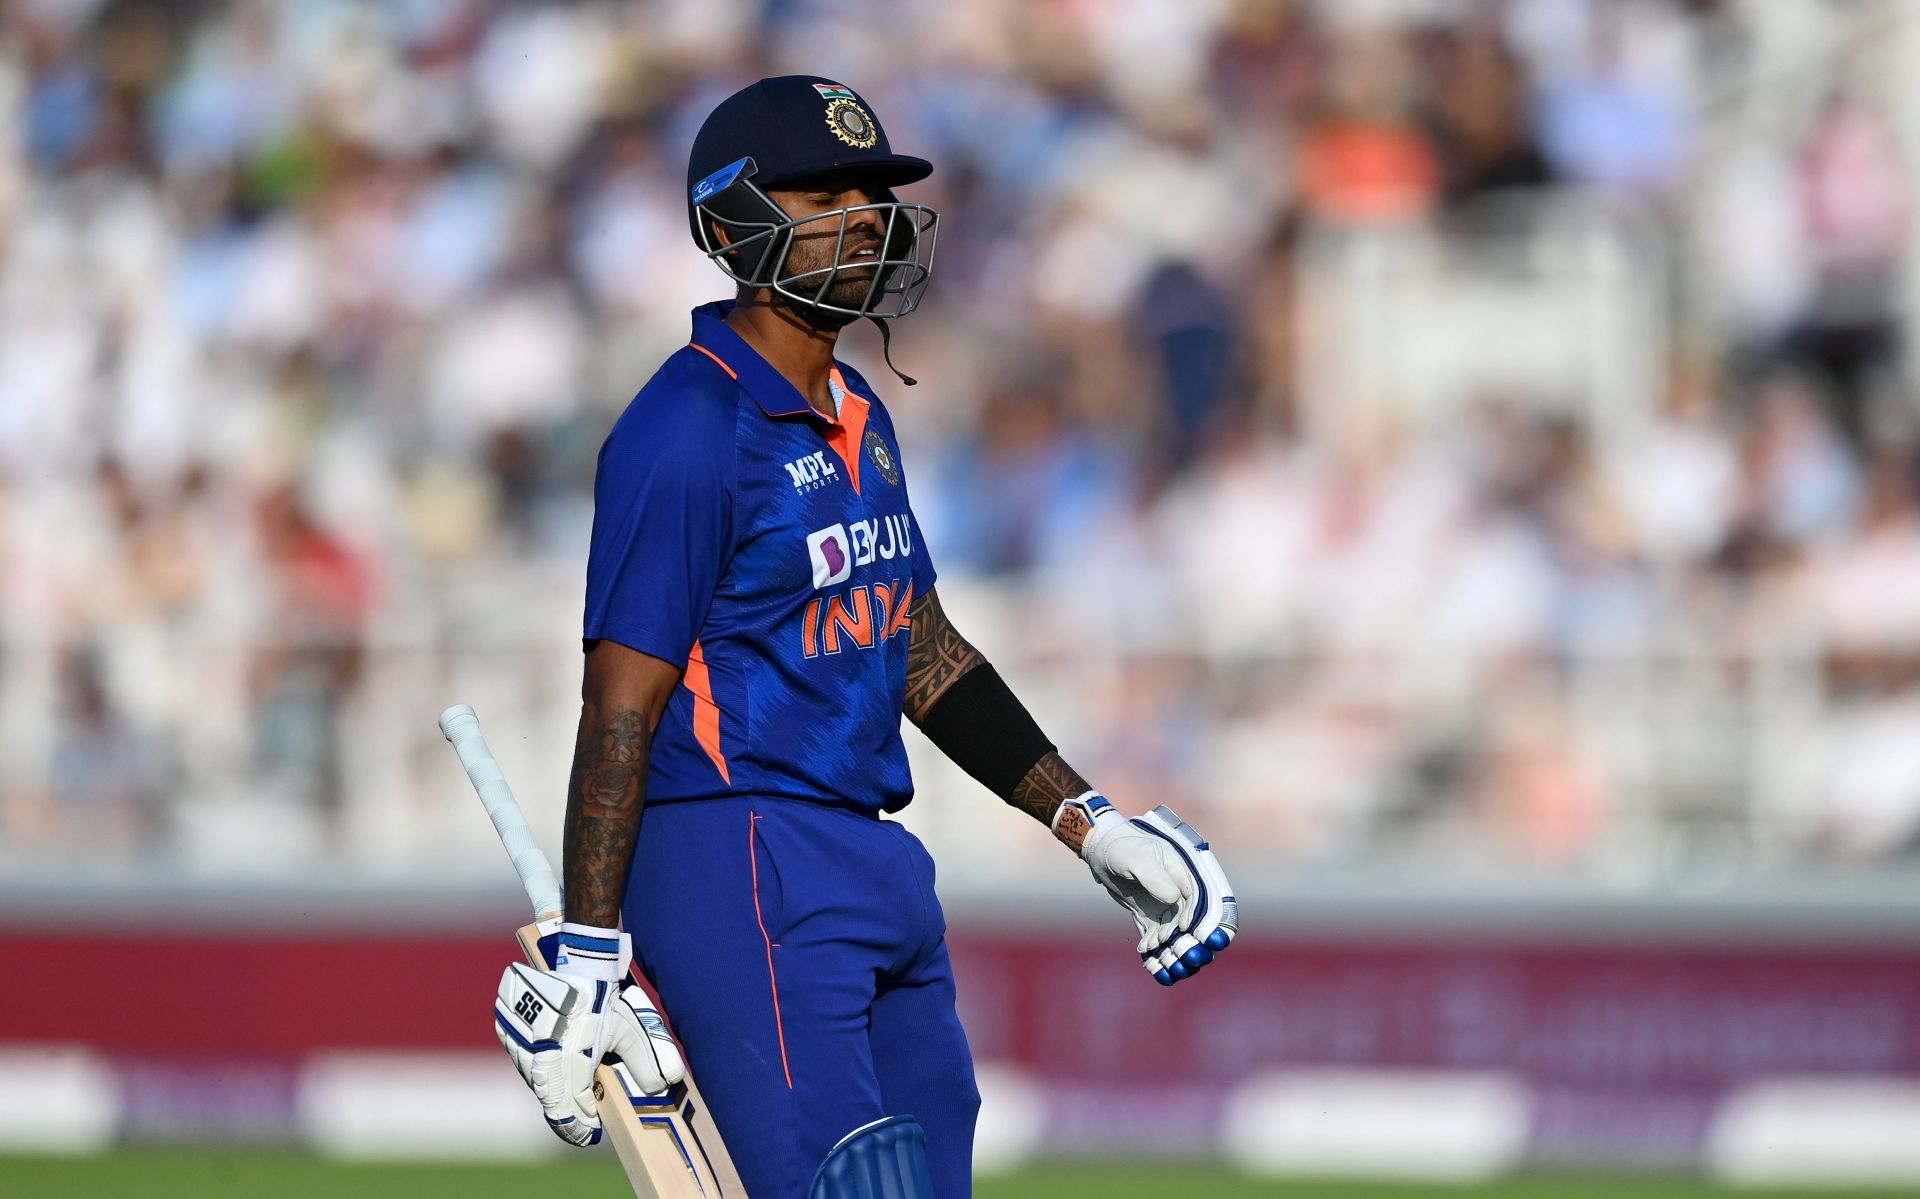 Suryakumar Yadav scored his maiden T20I hundred while batting at No.4 against England earlier this month (Image: Getty)